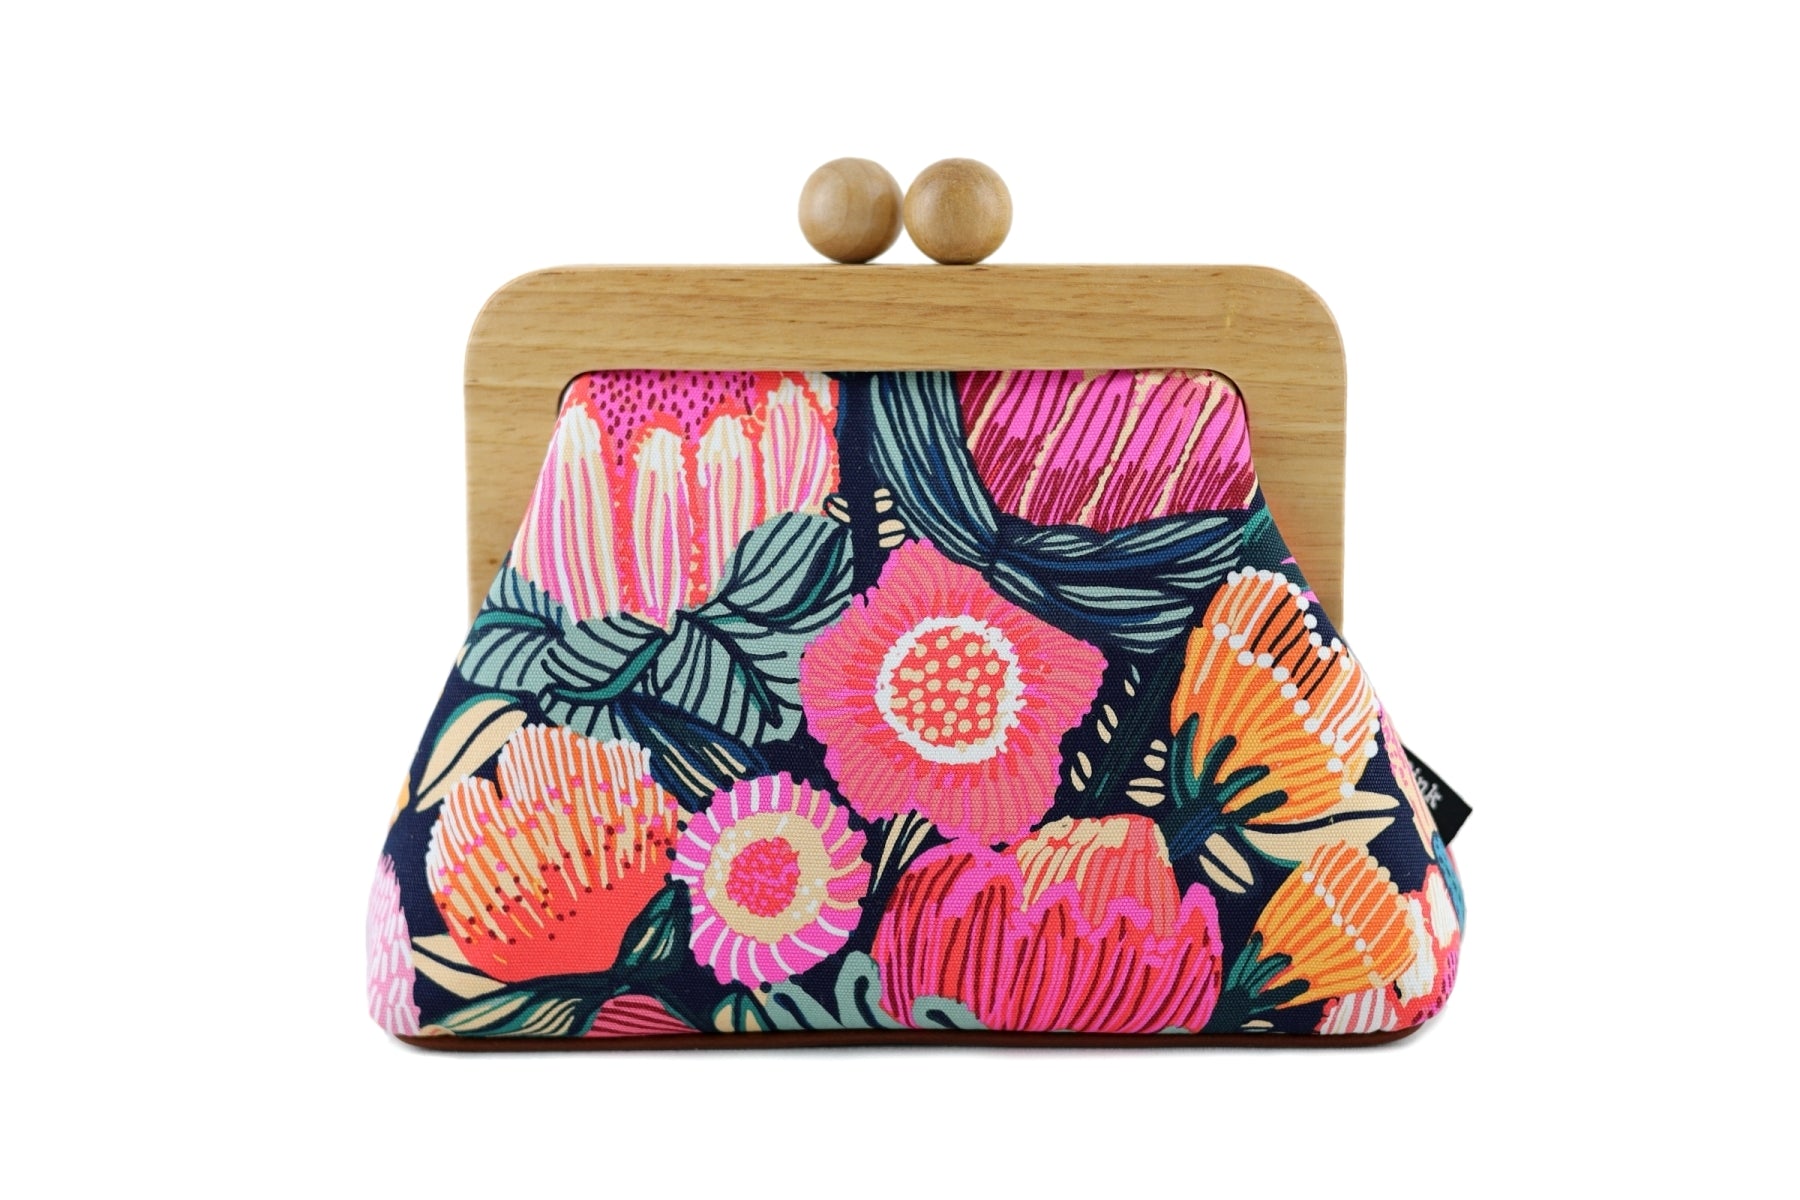 Australian Protea Garden Clutch Bag with Leather Strap | PINK OASIS